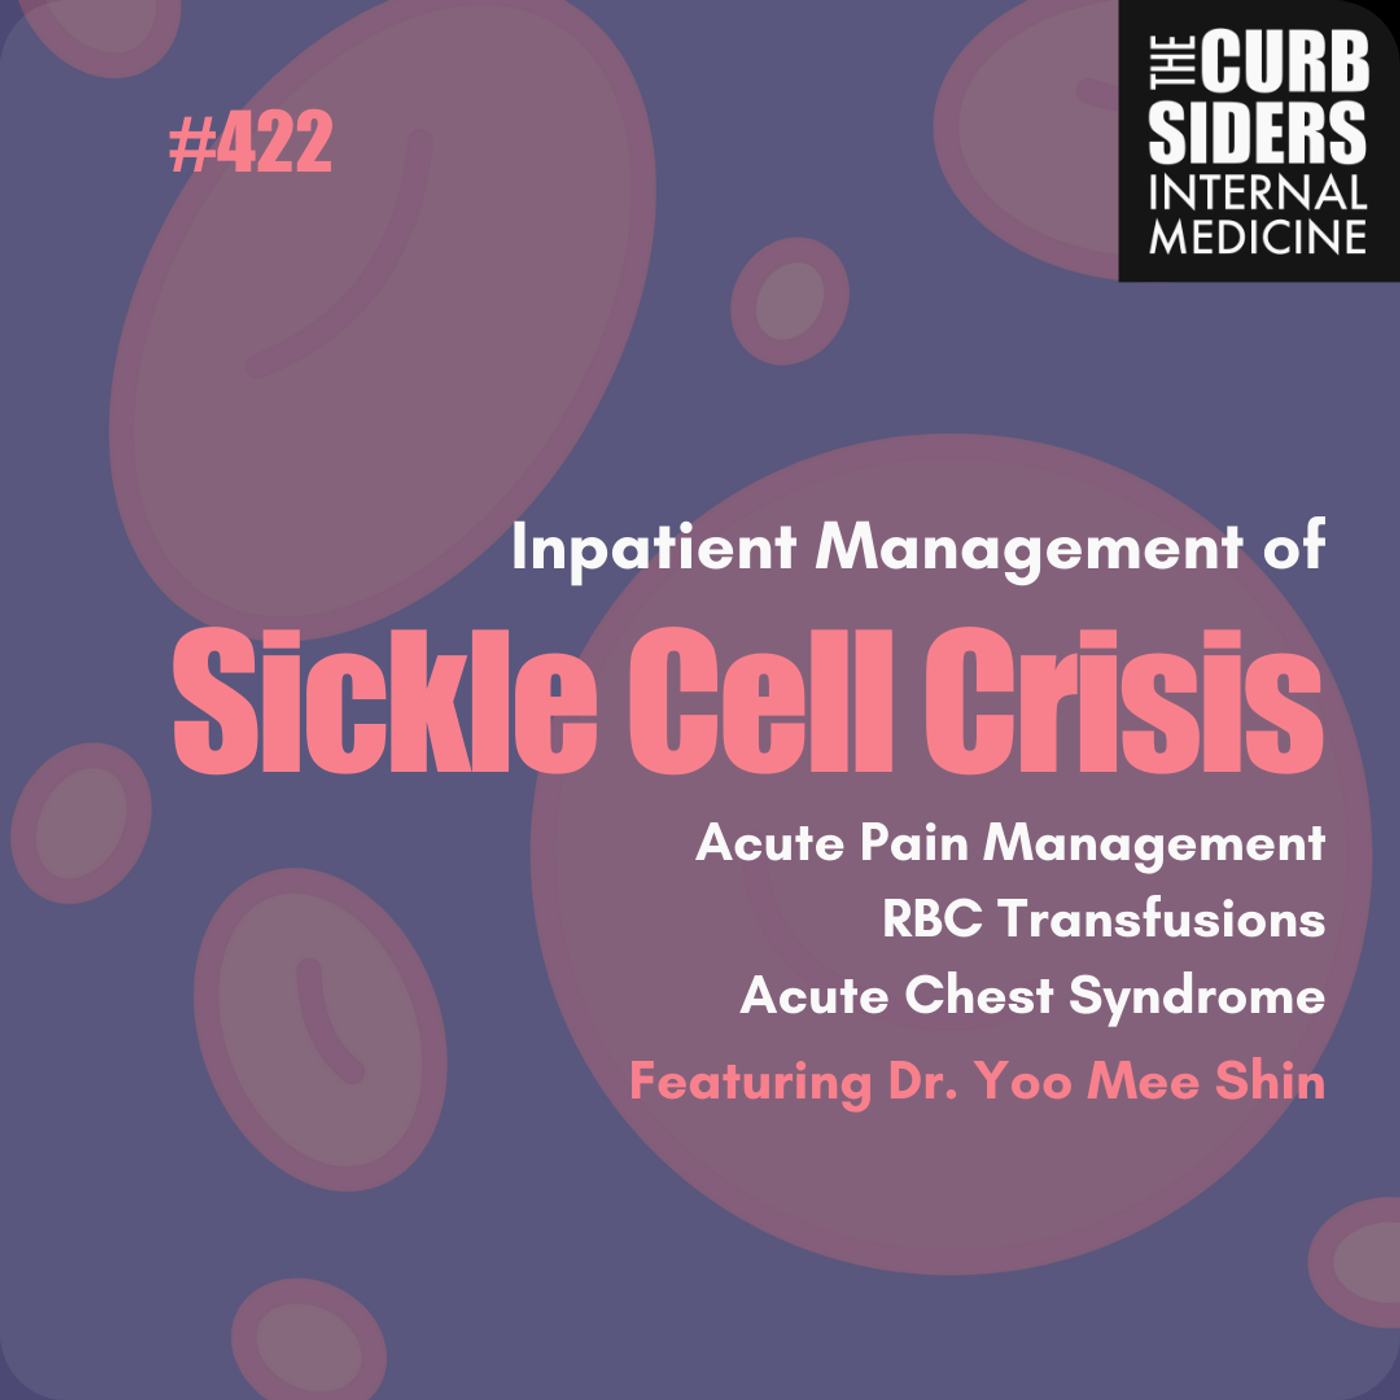 #422 LIVE! Inpatient Management of Sickle Cell Crisis, Acute Pain, RBC Transfusions & Acute Chest Syndrome